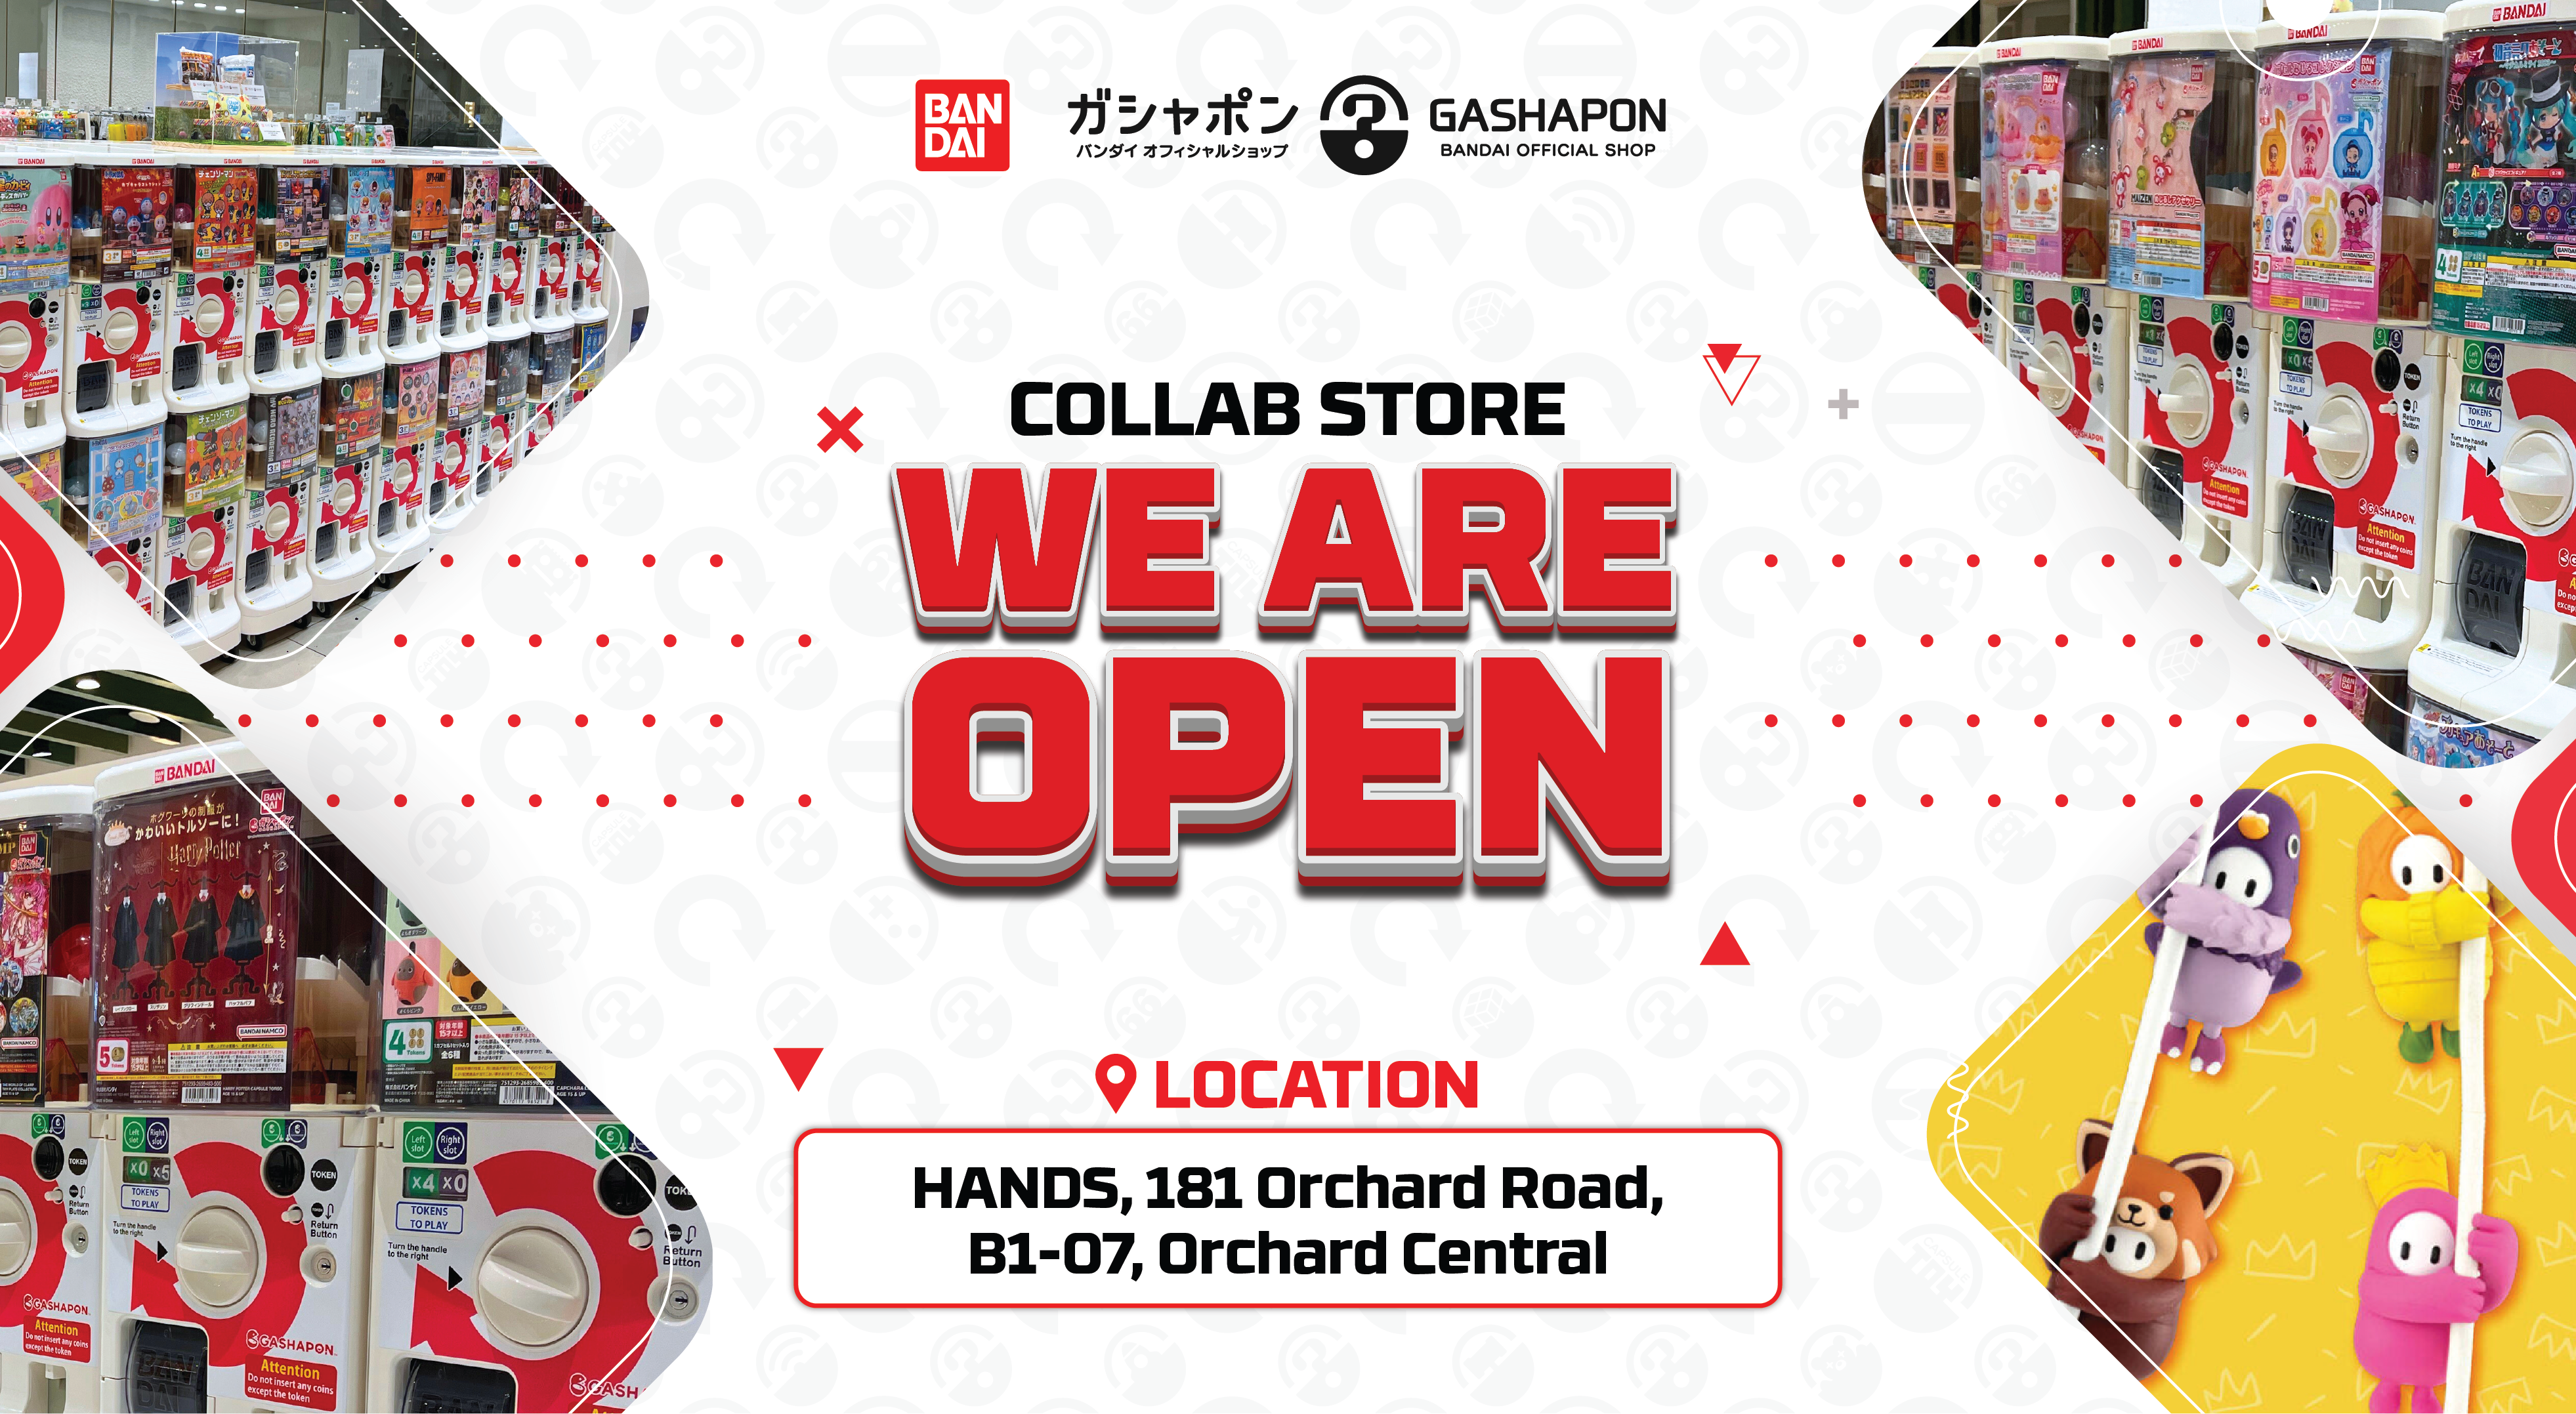 Gashapon Bandai Official Collab Store at HANDS Singapore Orchard Central